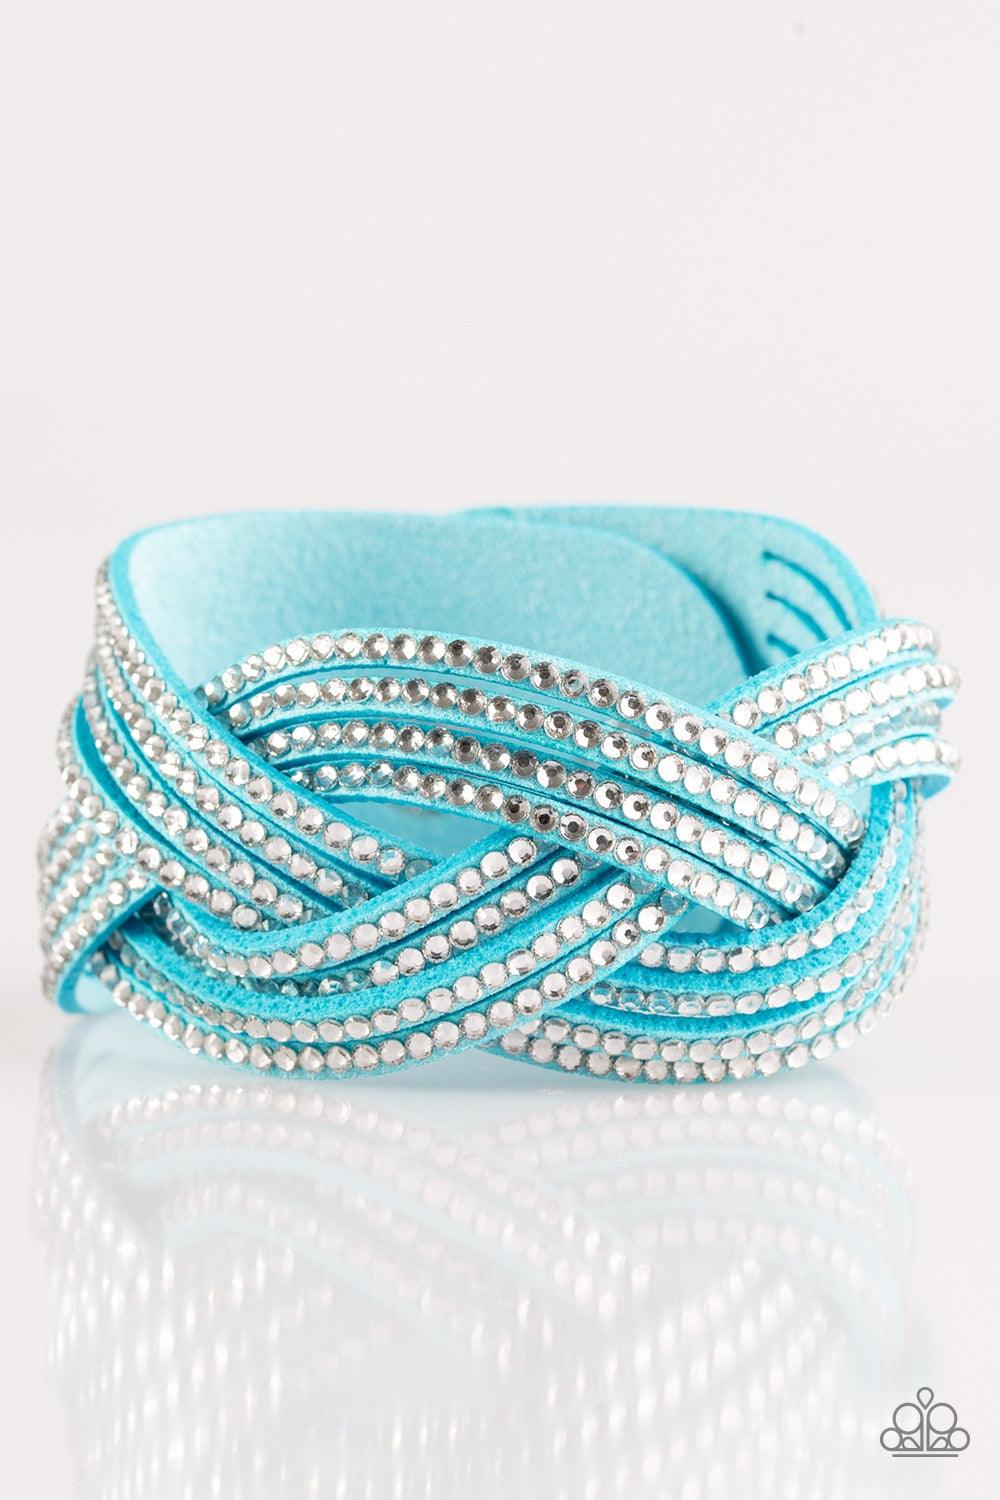 Paparazzi Accessories Big City Shimmer - Blue Glassy white rhinestones are encrusted along crisscrossing strands of blue suede, creating bold shimmer around the wrist. Features an adjustable snap closure. Jewelry